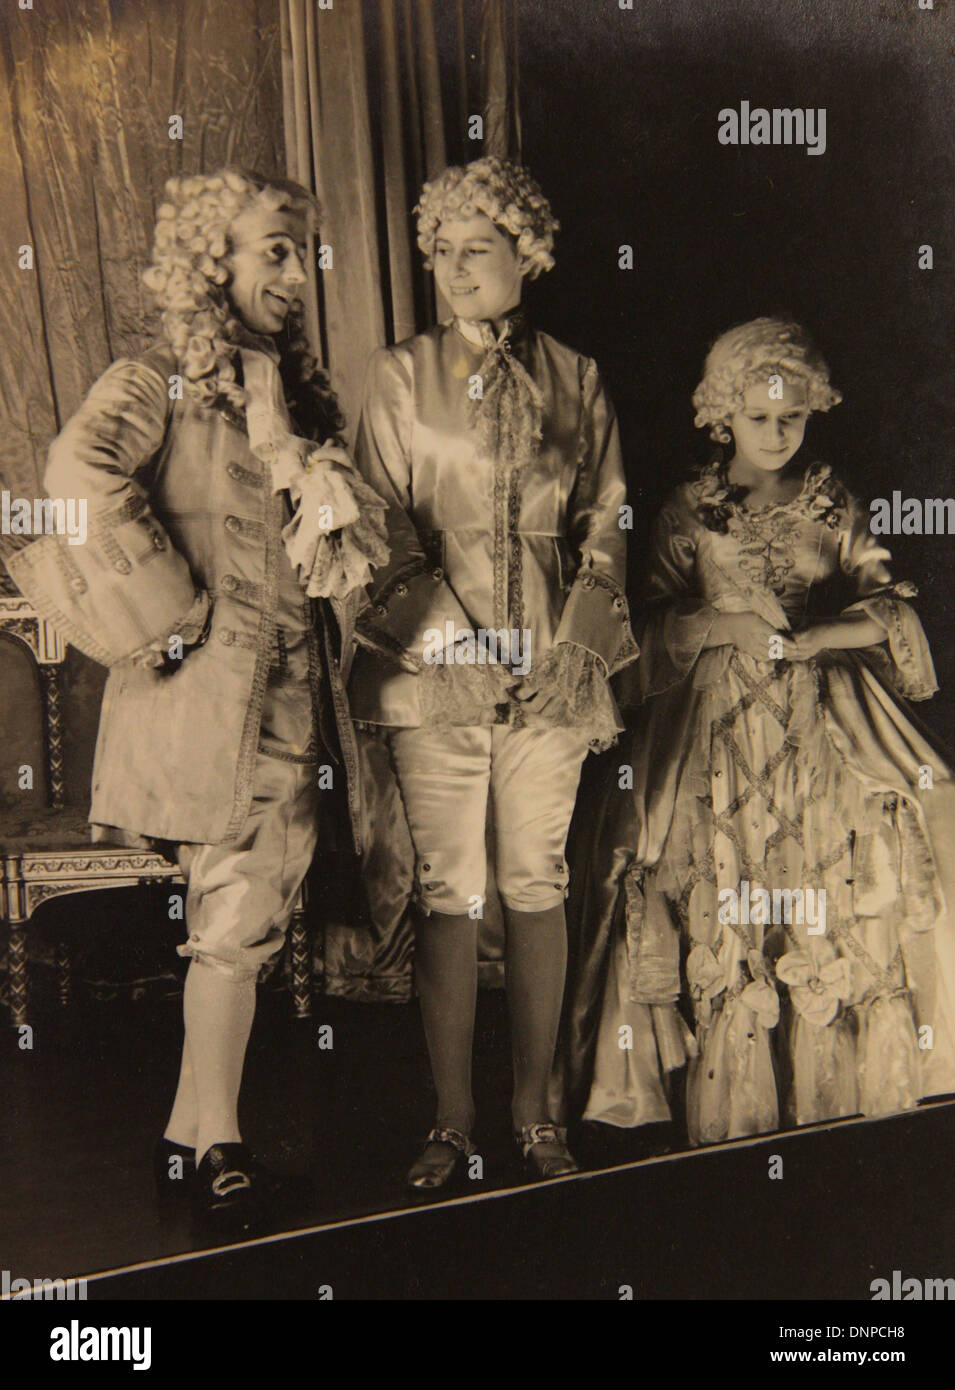 A photograph of Princess Margaret (right) and Princess Elizabeth (middle) in the play Aladdin, 1943 Stock Photo